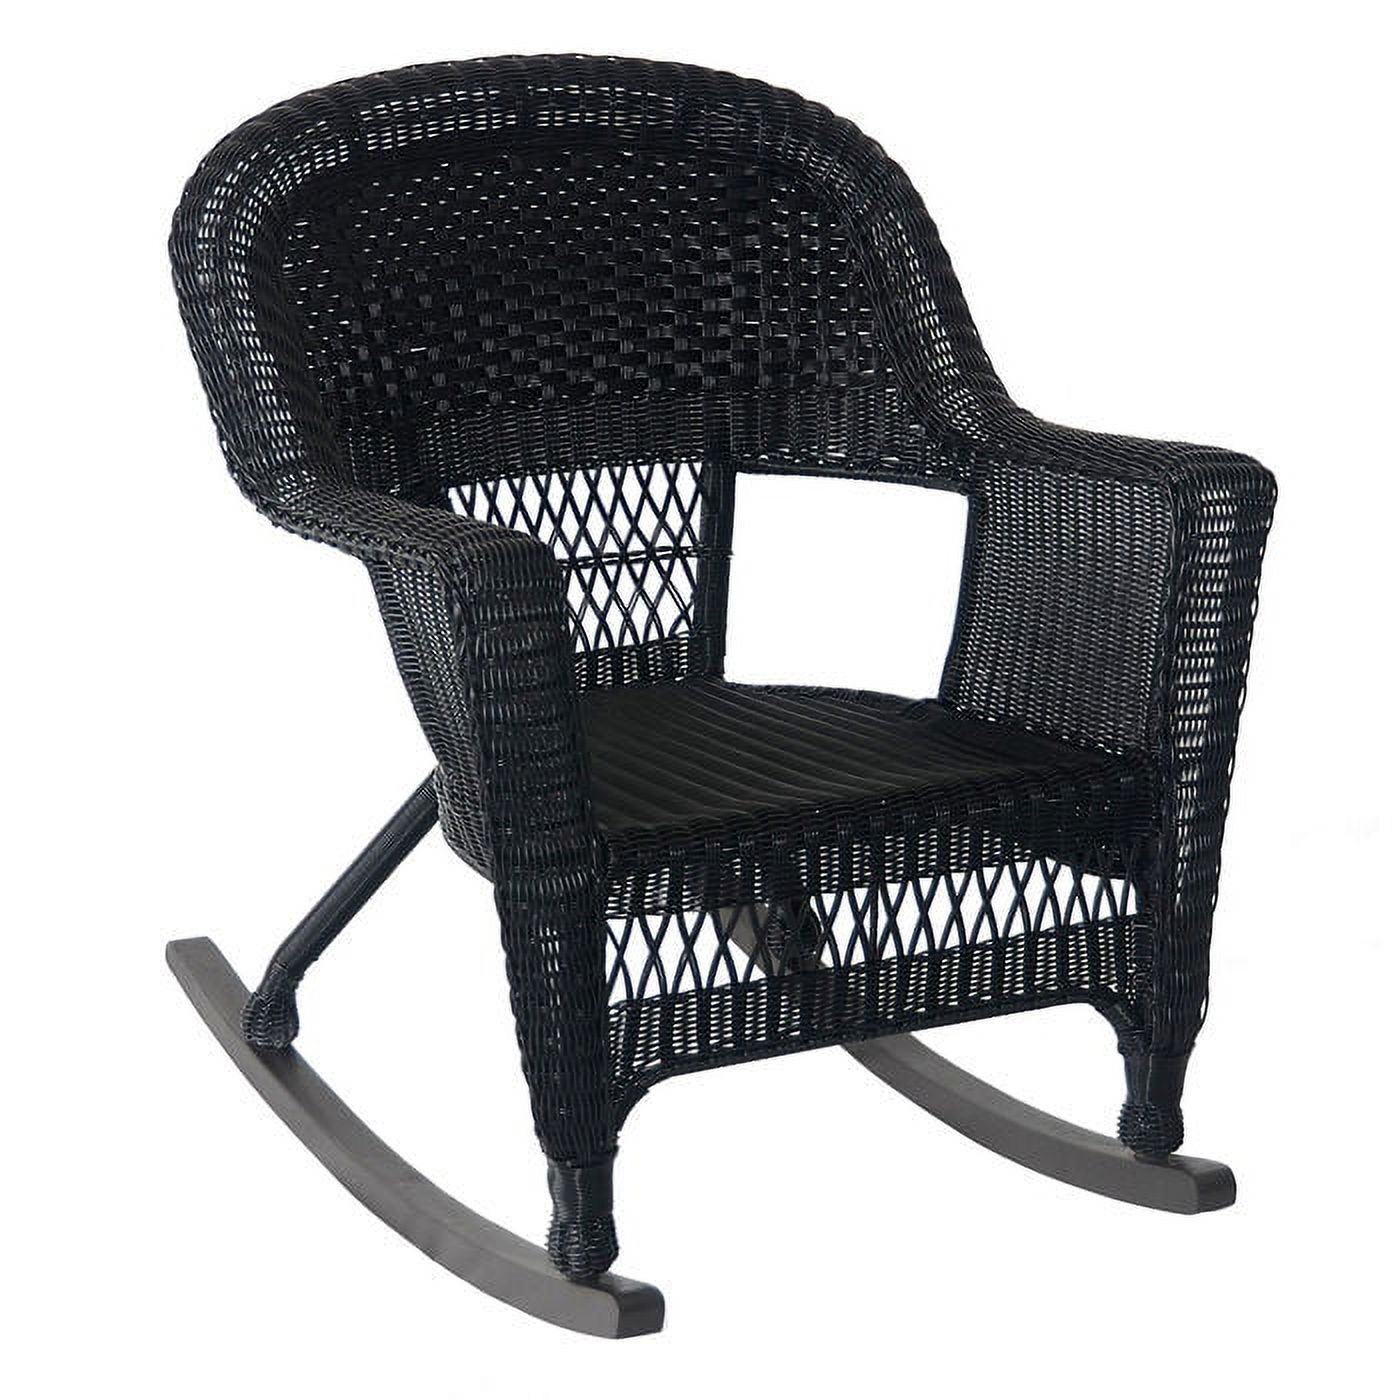 Jeco 3pc Rocker Wicker Chair Set With Red Cushion-Finish:Black - image 4 of 4